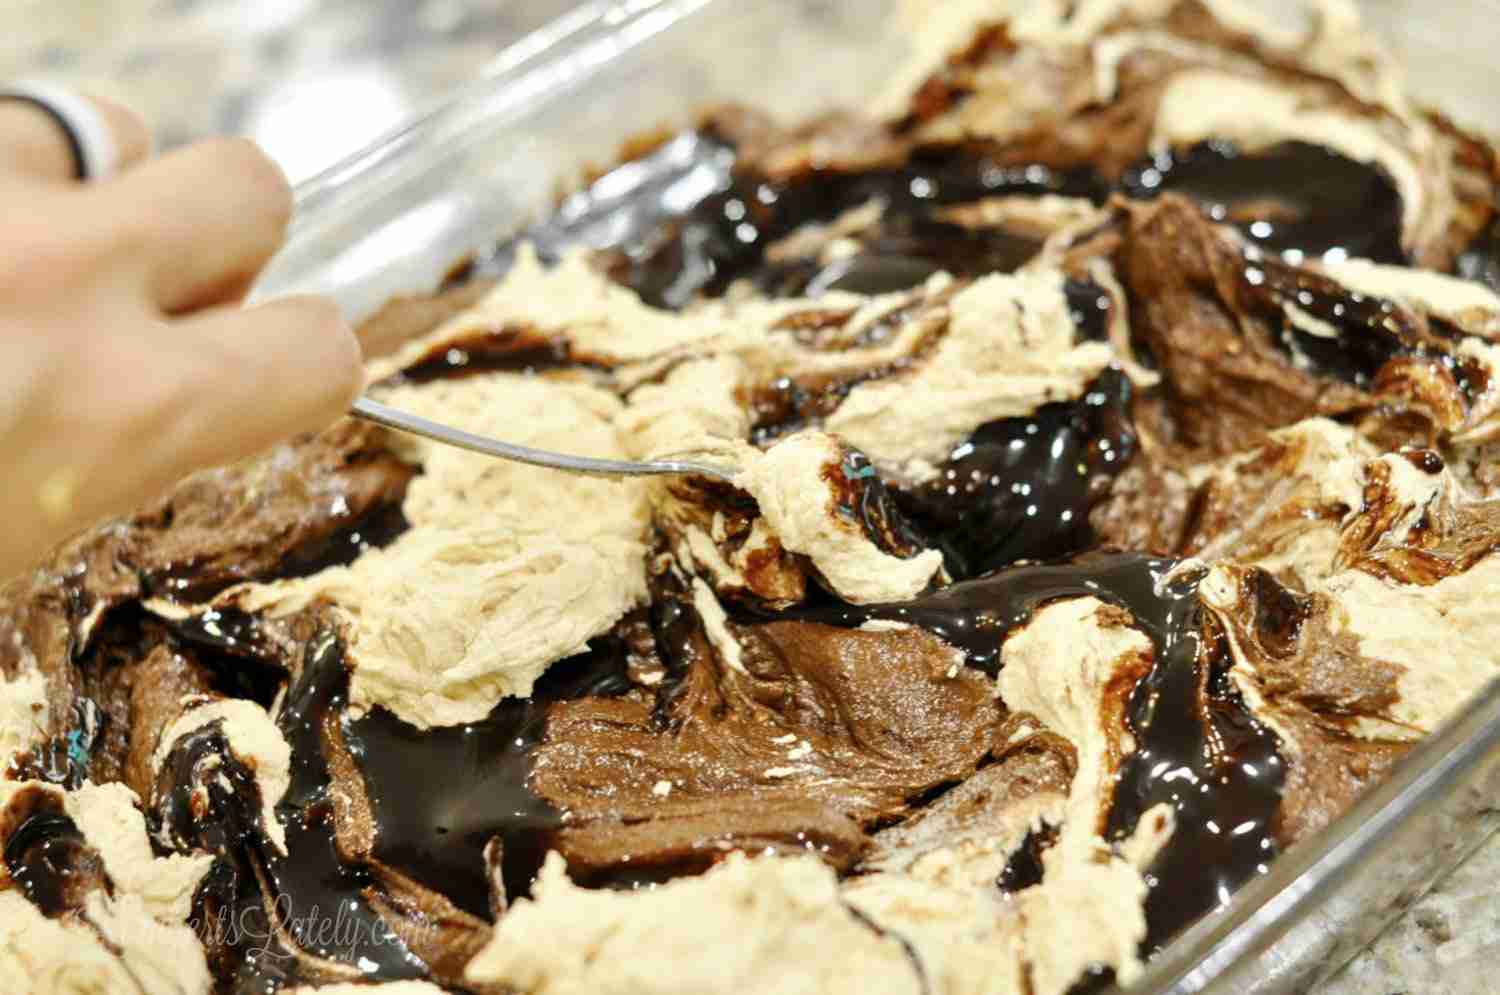 swirling chocolate and peanut butter in a baking dish.